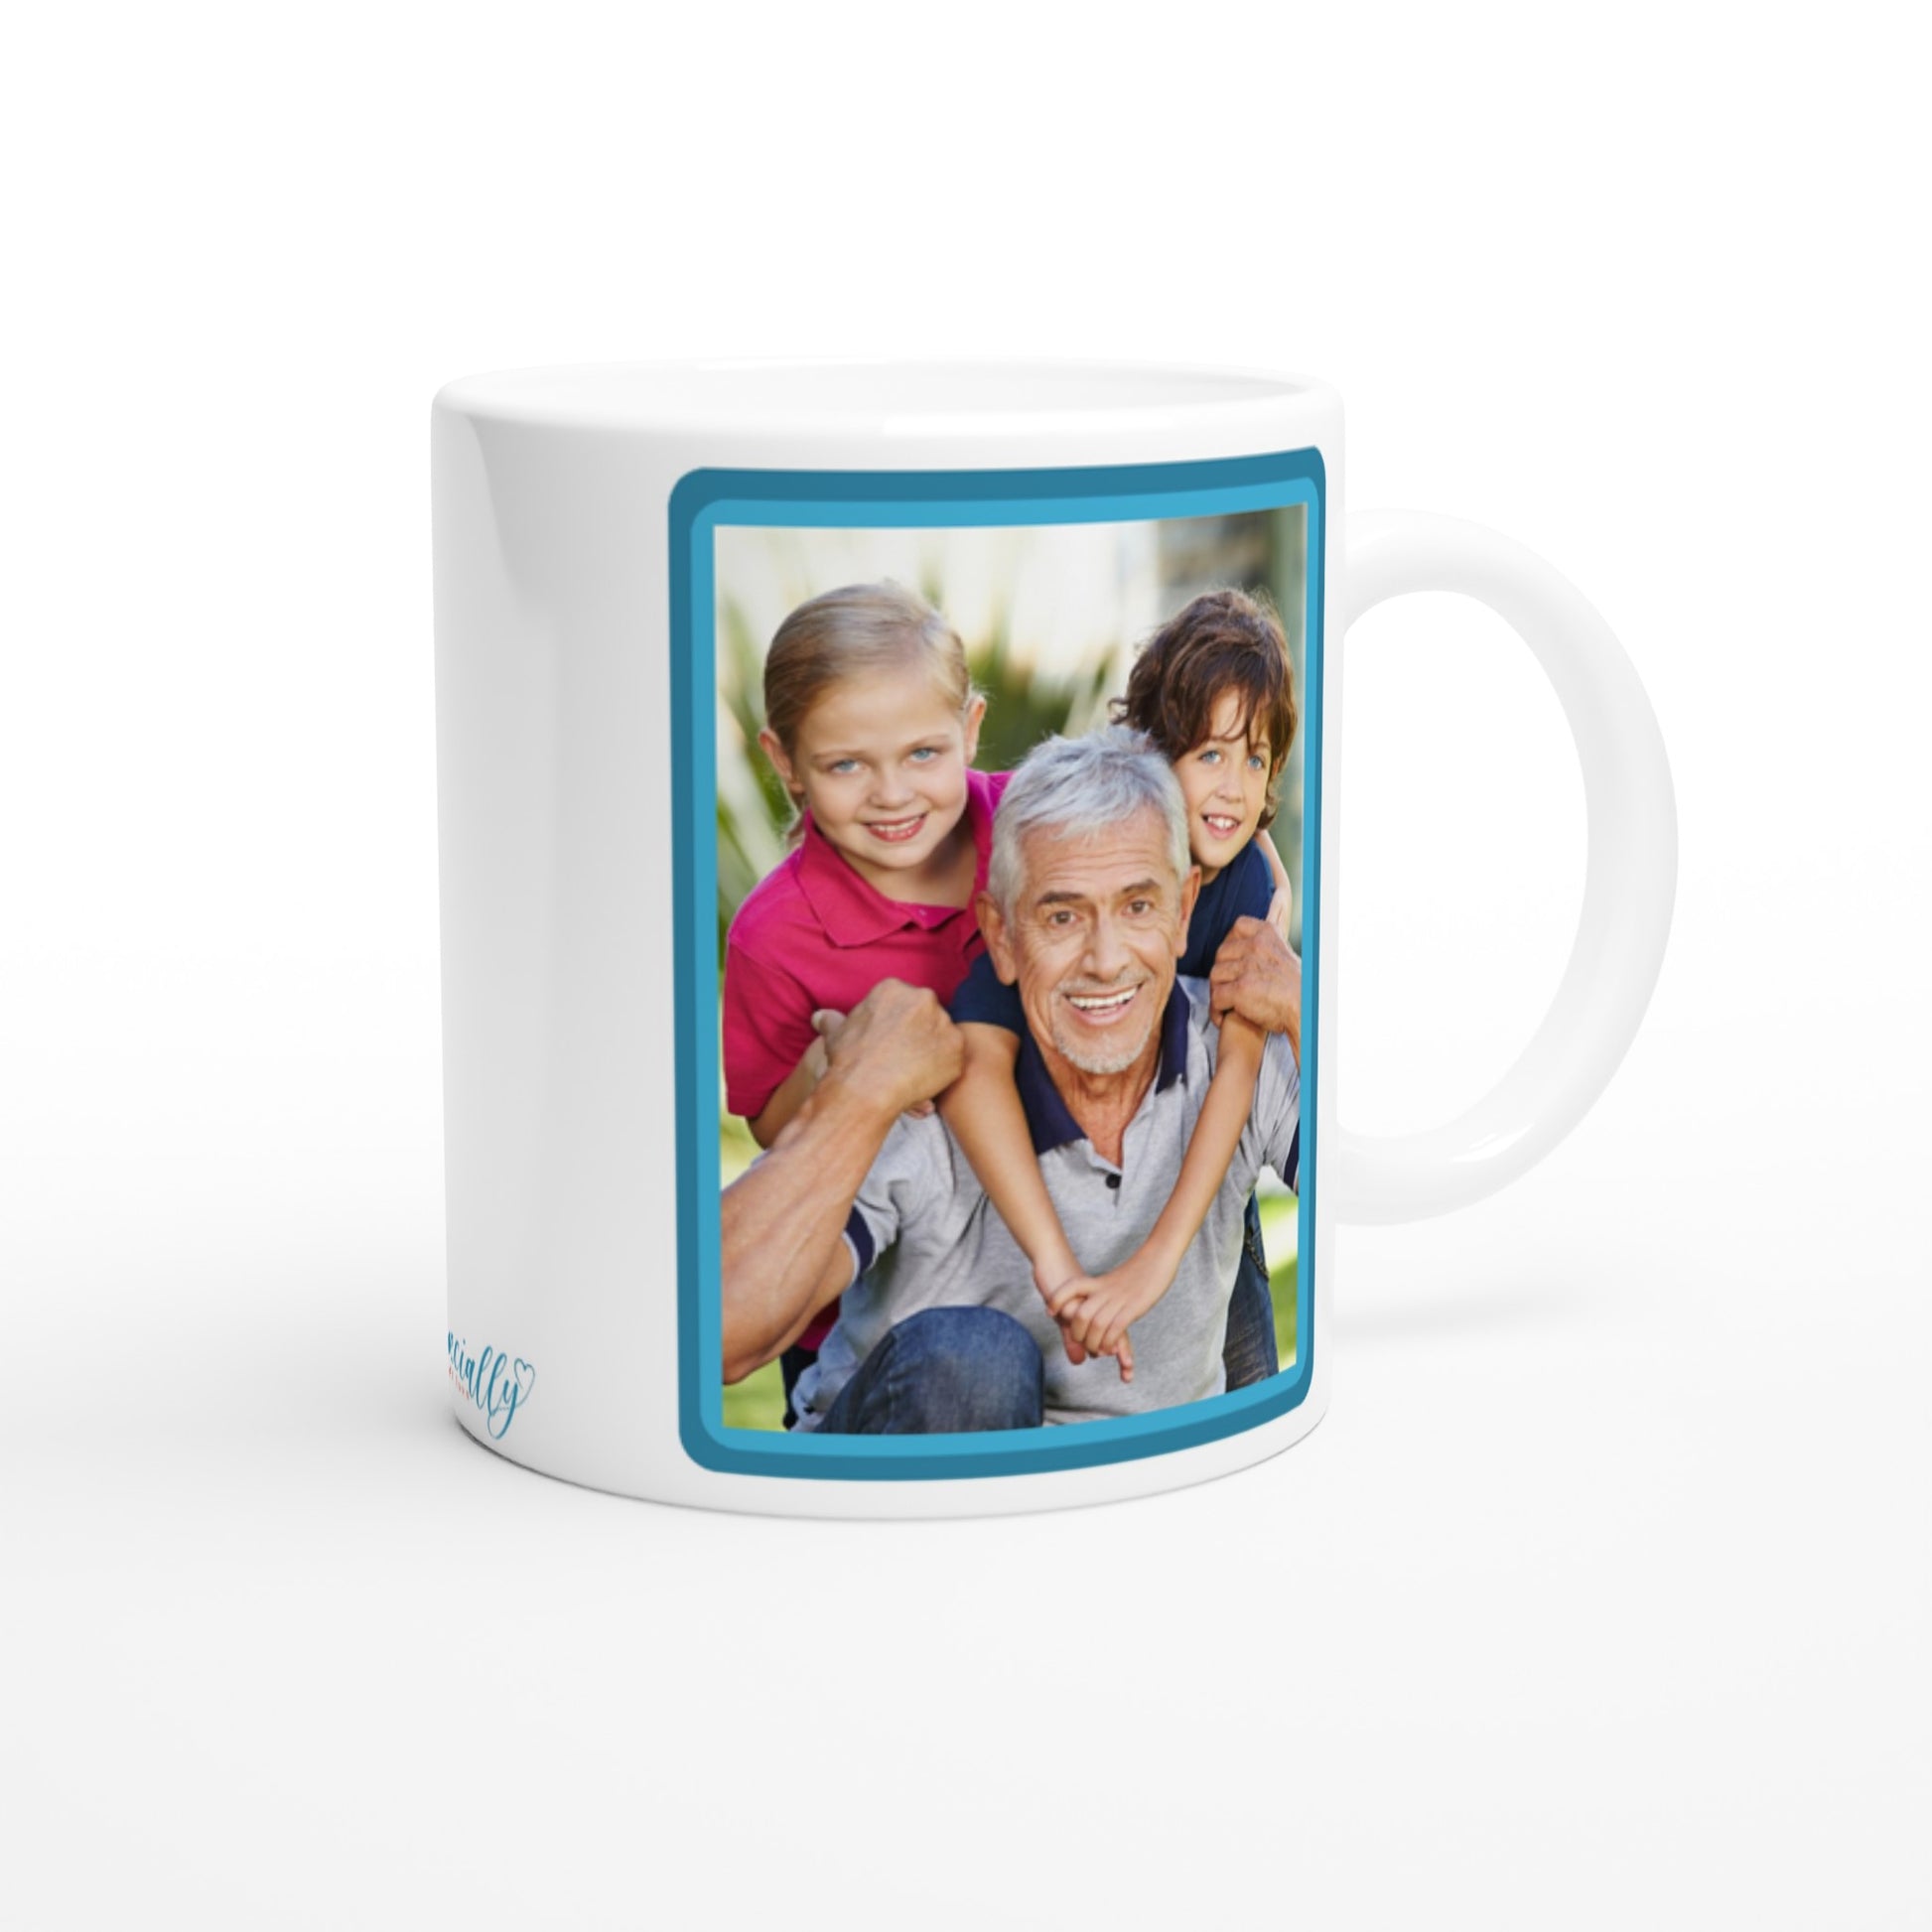 "Grandpa Time is the Best Time" Customizable Photo Mug 11 oz. side view